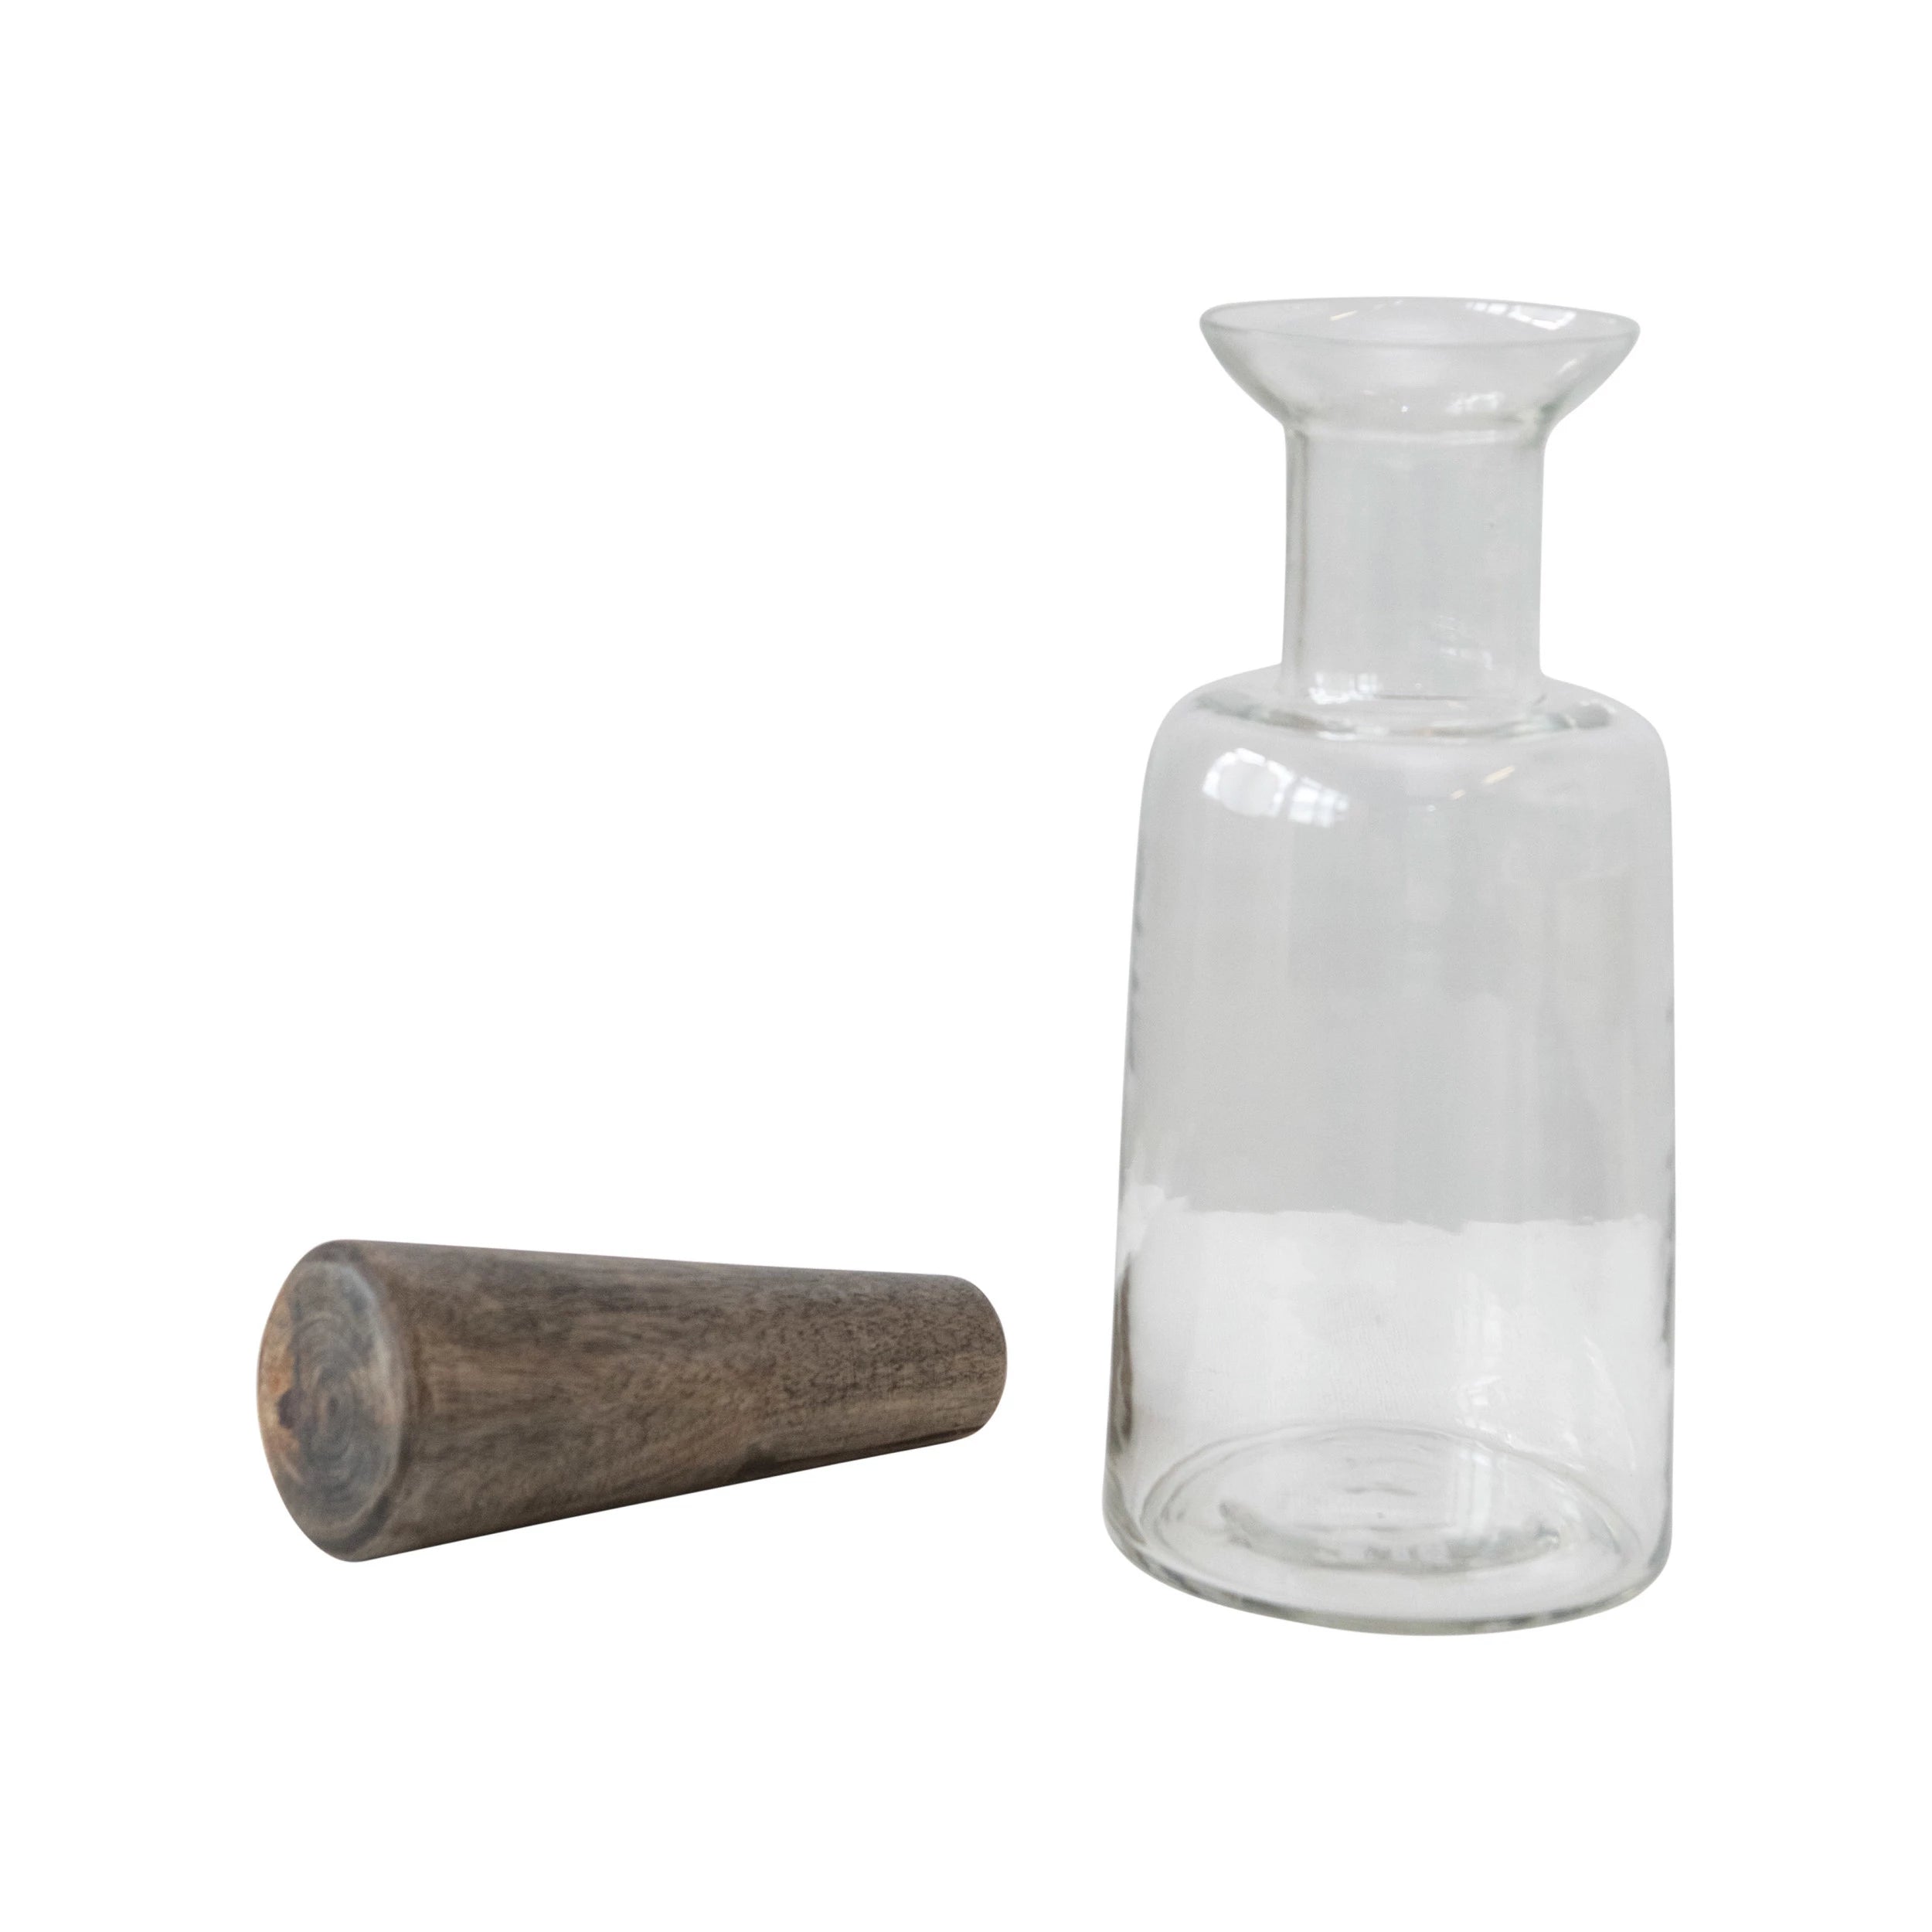 32oz Glass Decanter with Mango Wood Stopper